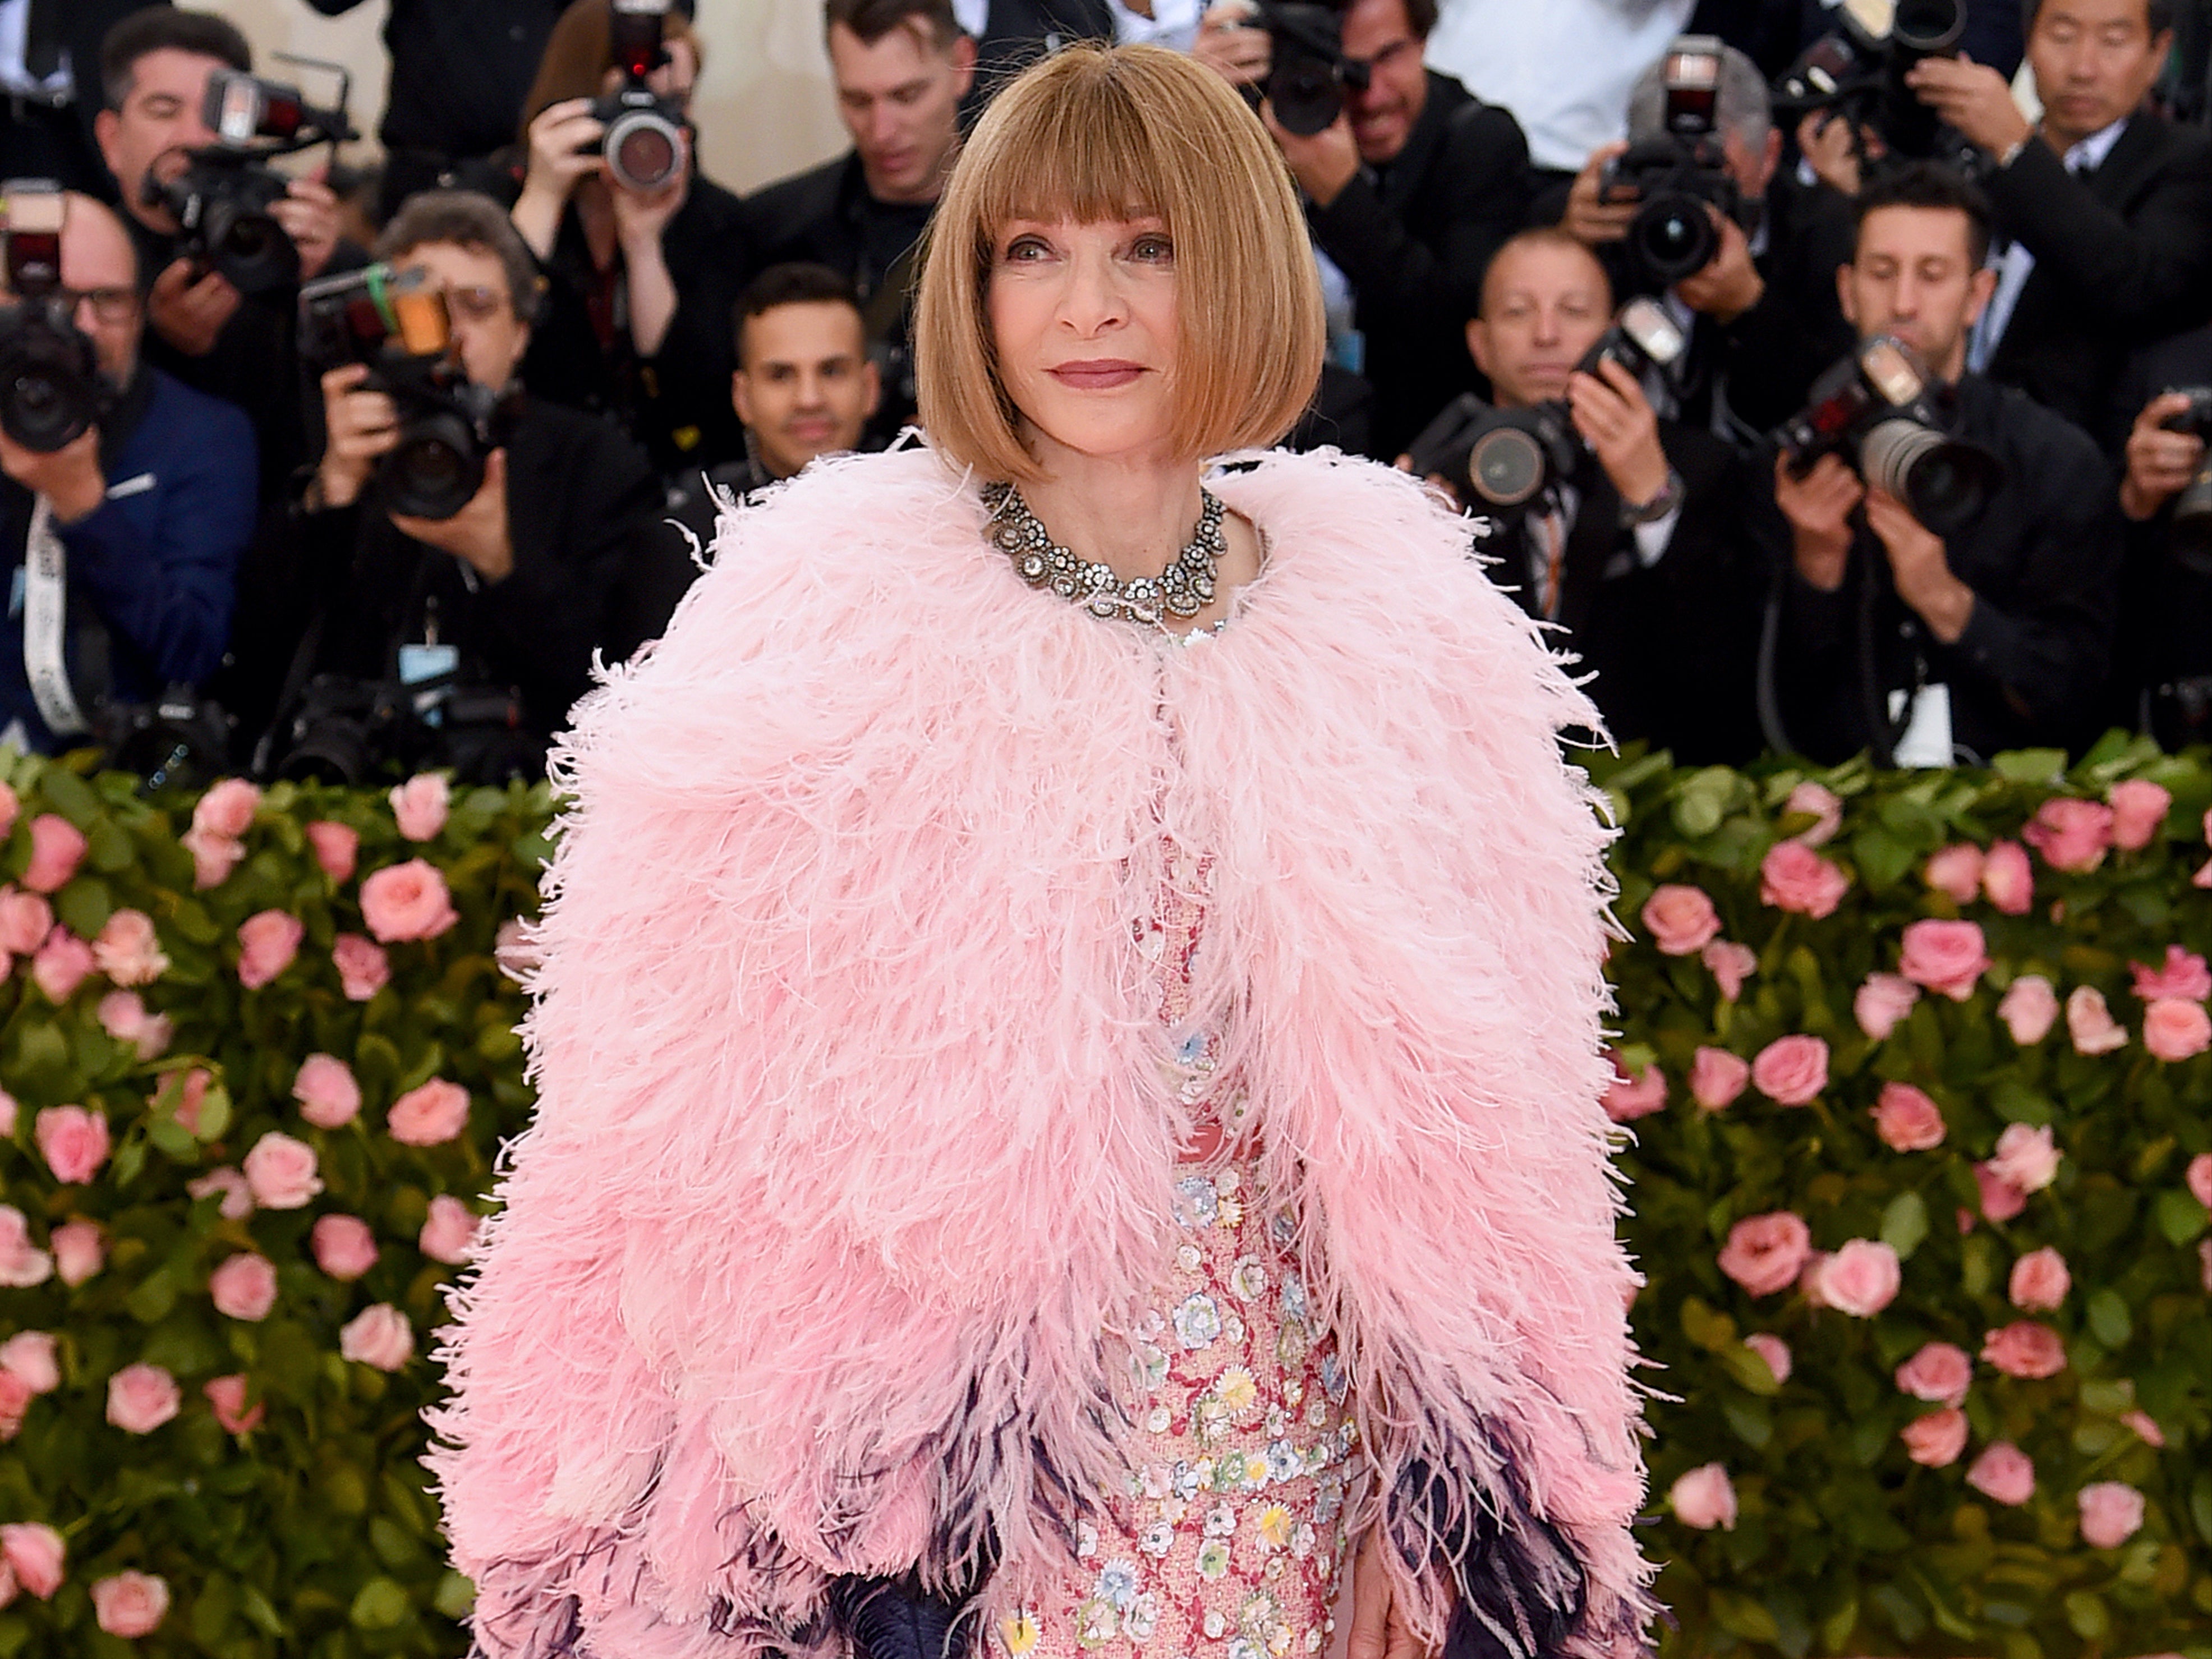 Anna Wintour gets additional title as Condé Nast reshuffles